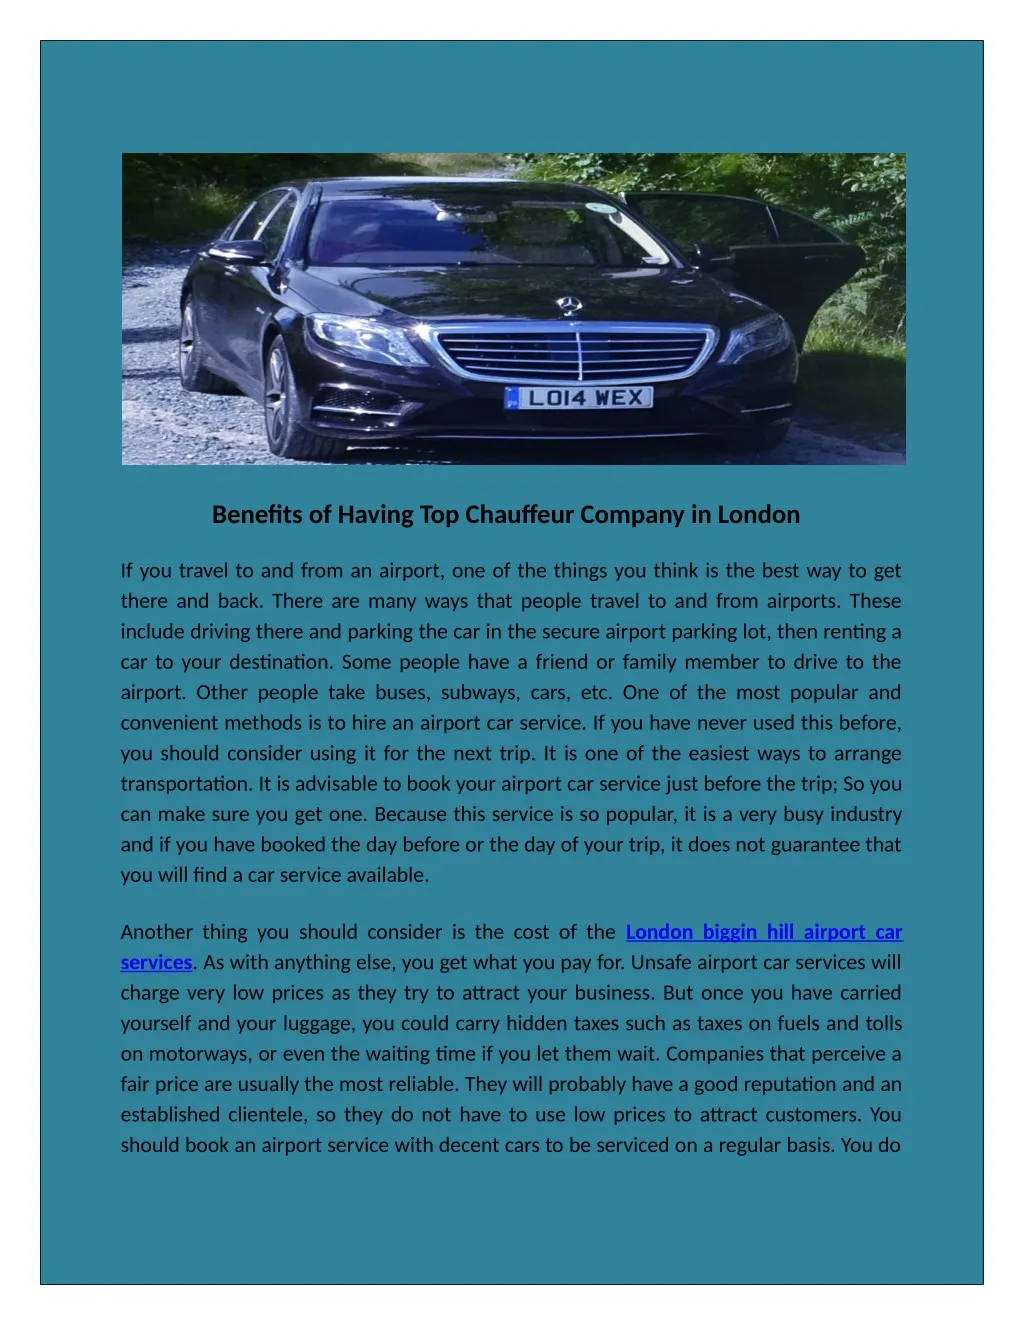 benefits of having top chauffeur company in london